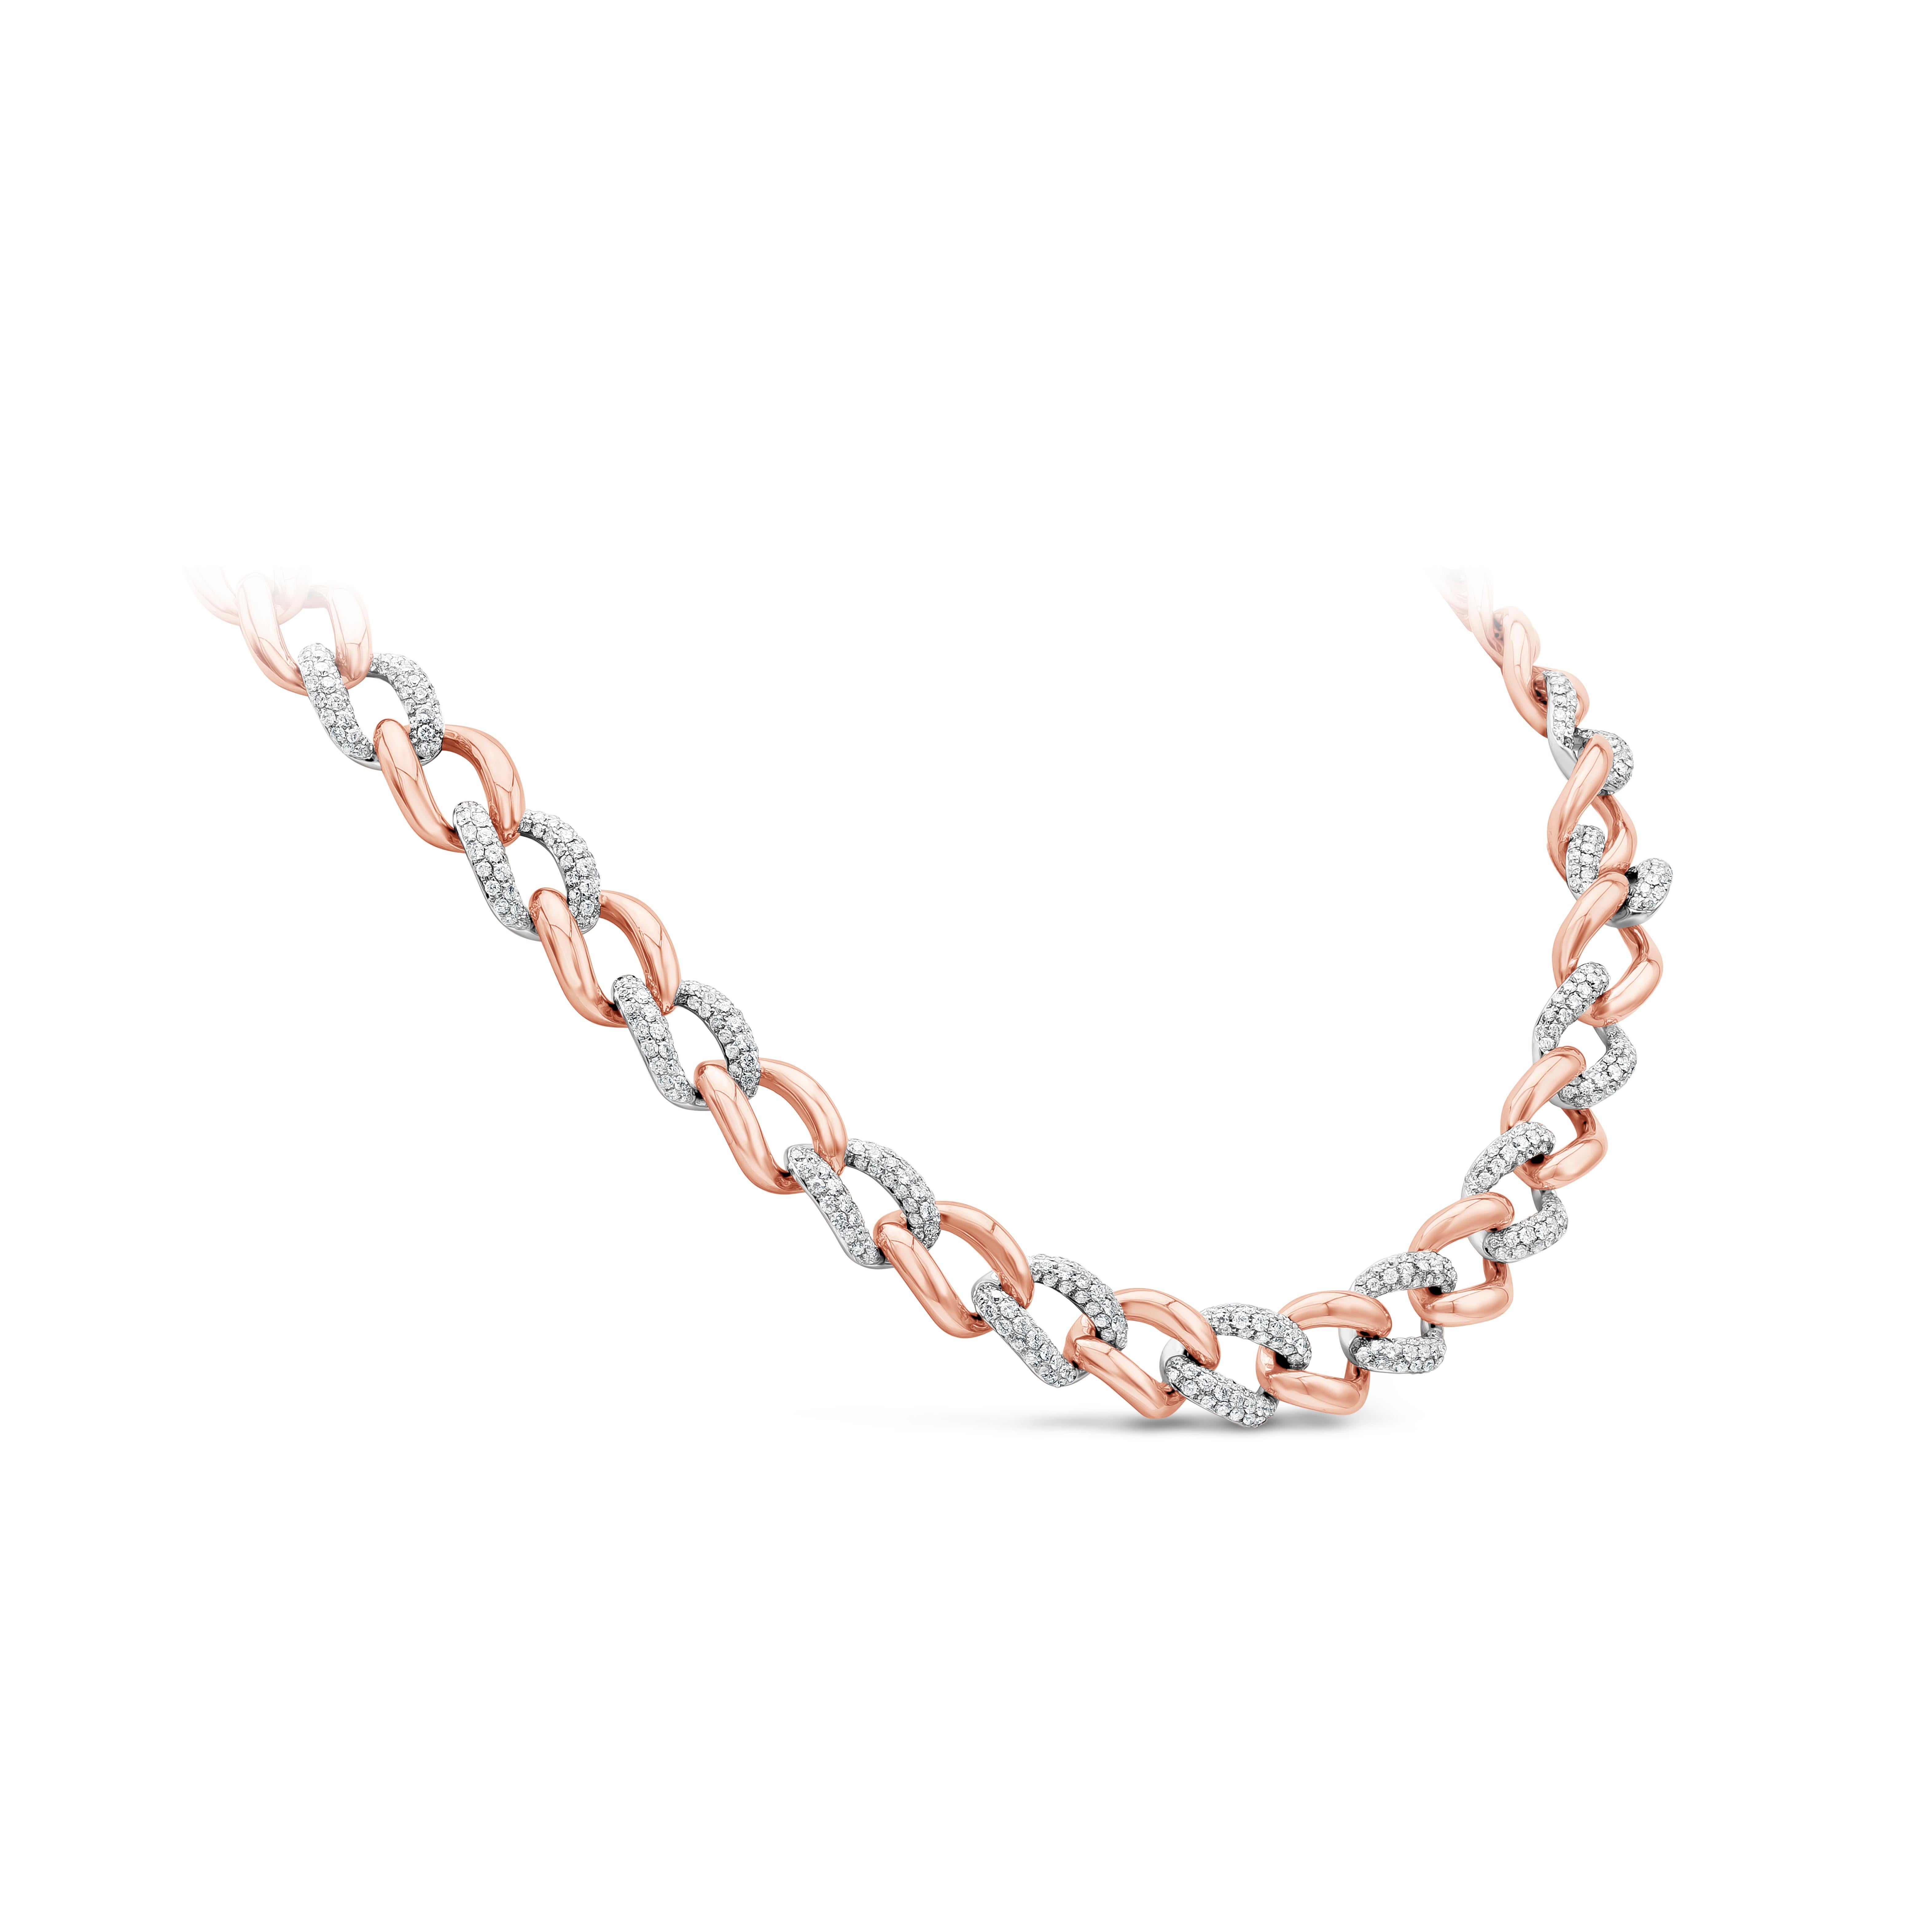 Simple in aesthetics and marvelously designed, this large link diamond necklace is made in 18 karats rose gold. Accented by 550 pieces of bright round diamonds weighing 6.17 carats total, F/G color and VS clarity. This beautiful necklace is 17